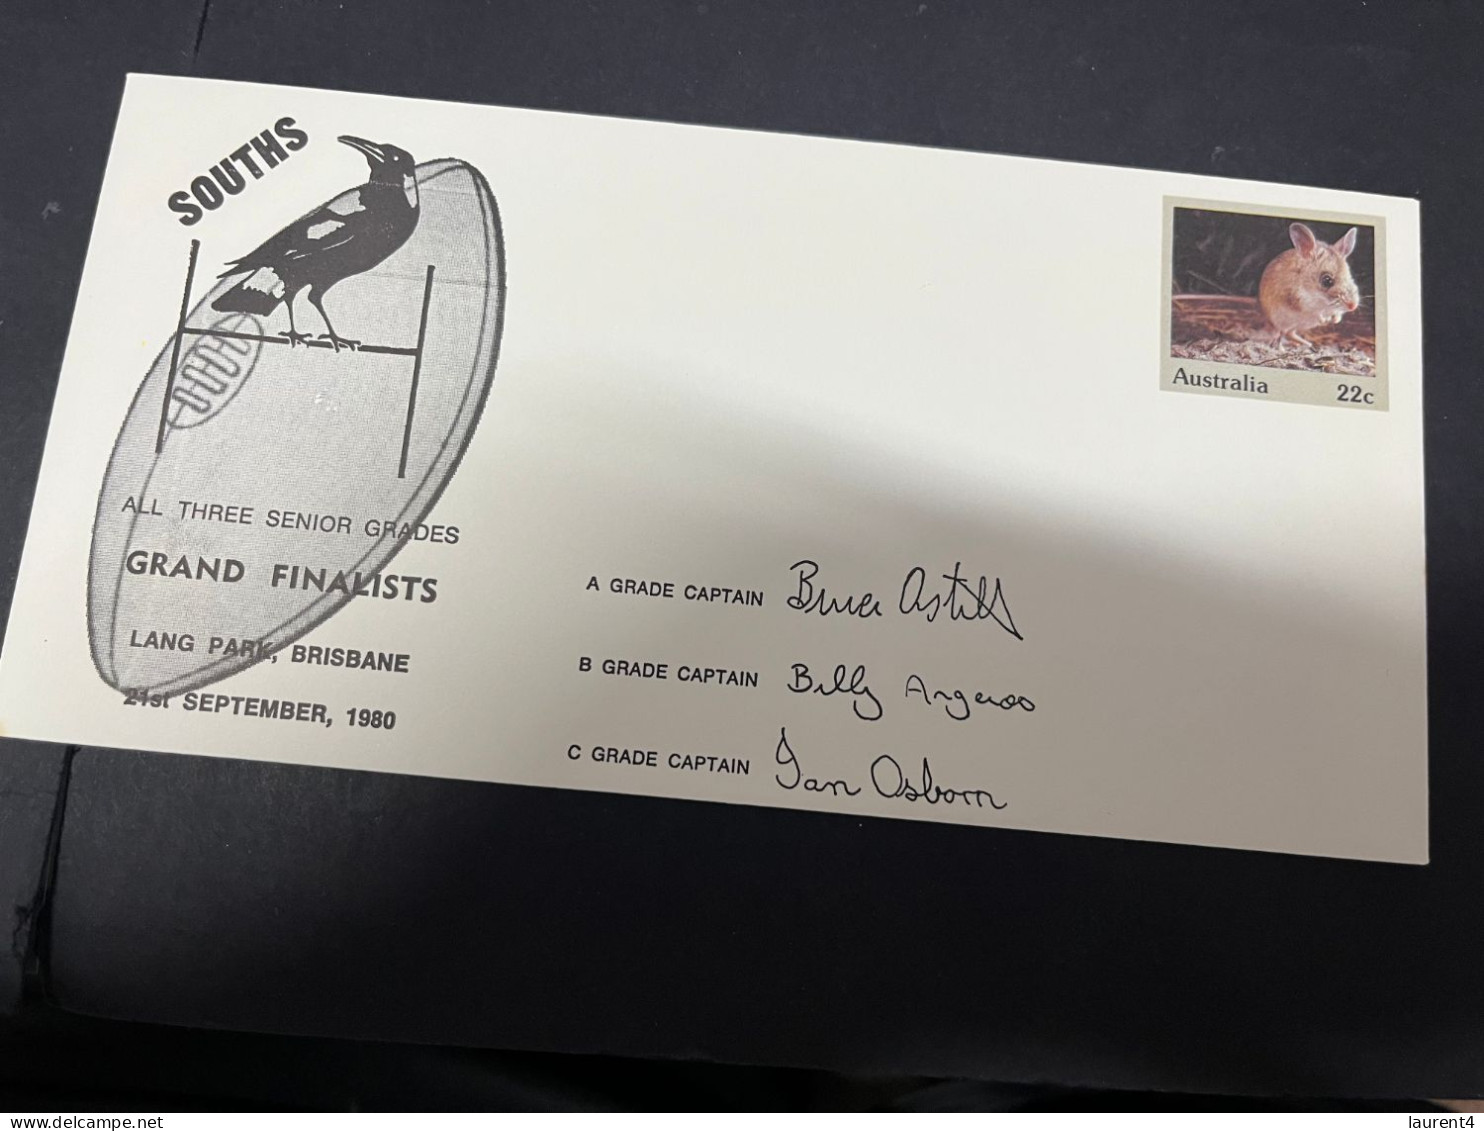 30-4-2023 (3 Z 29) Australia FDC (1 Covers) 1980 - OZ Football - South (magpies) Grand Finalists (signed - Hoping Mouse) - Premiers Jours (FDC)